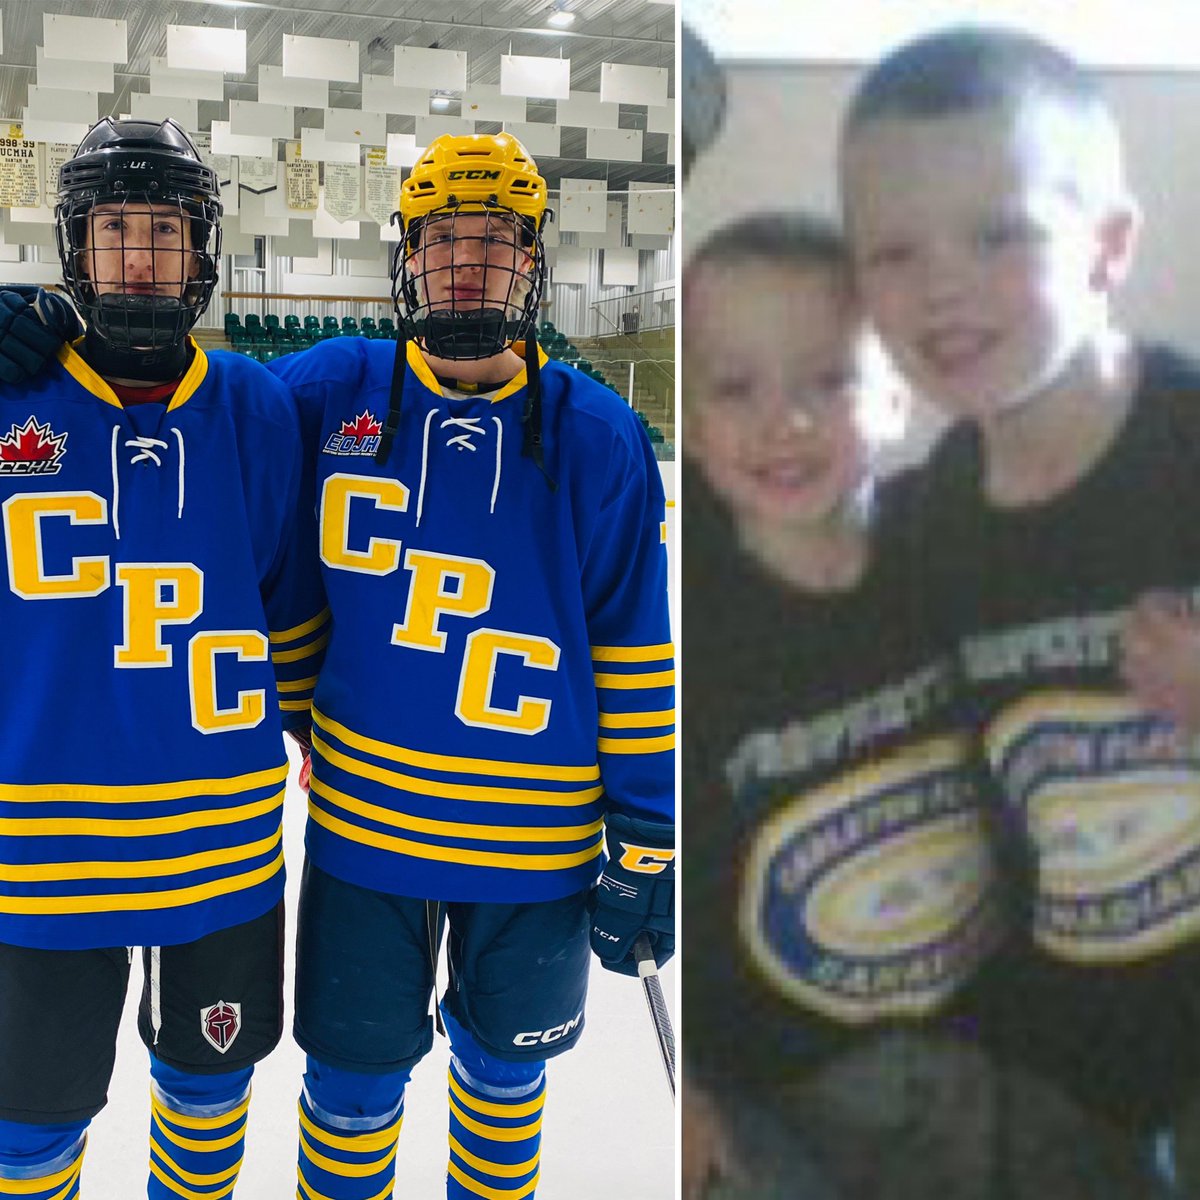 From fans in the stands, to teammates.  Love that our boys got an opportunity to play together 💙💛
#devlinbrothers #hometownproud